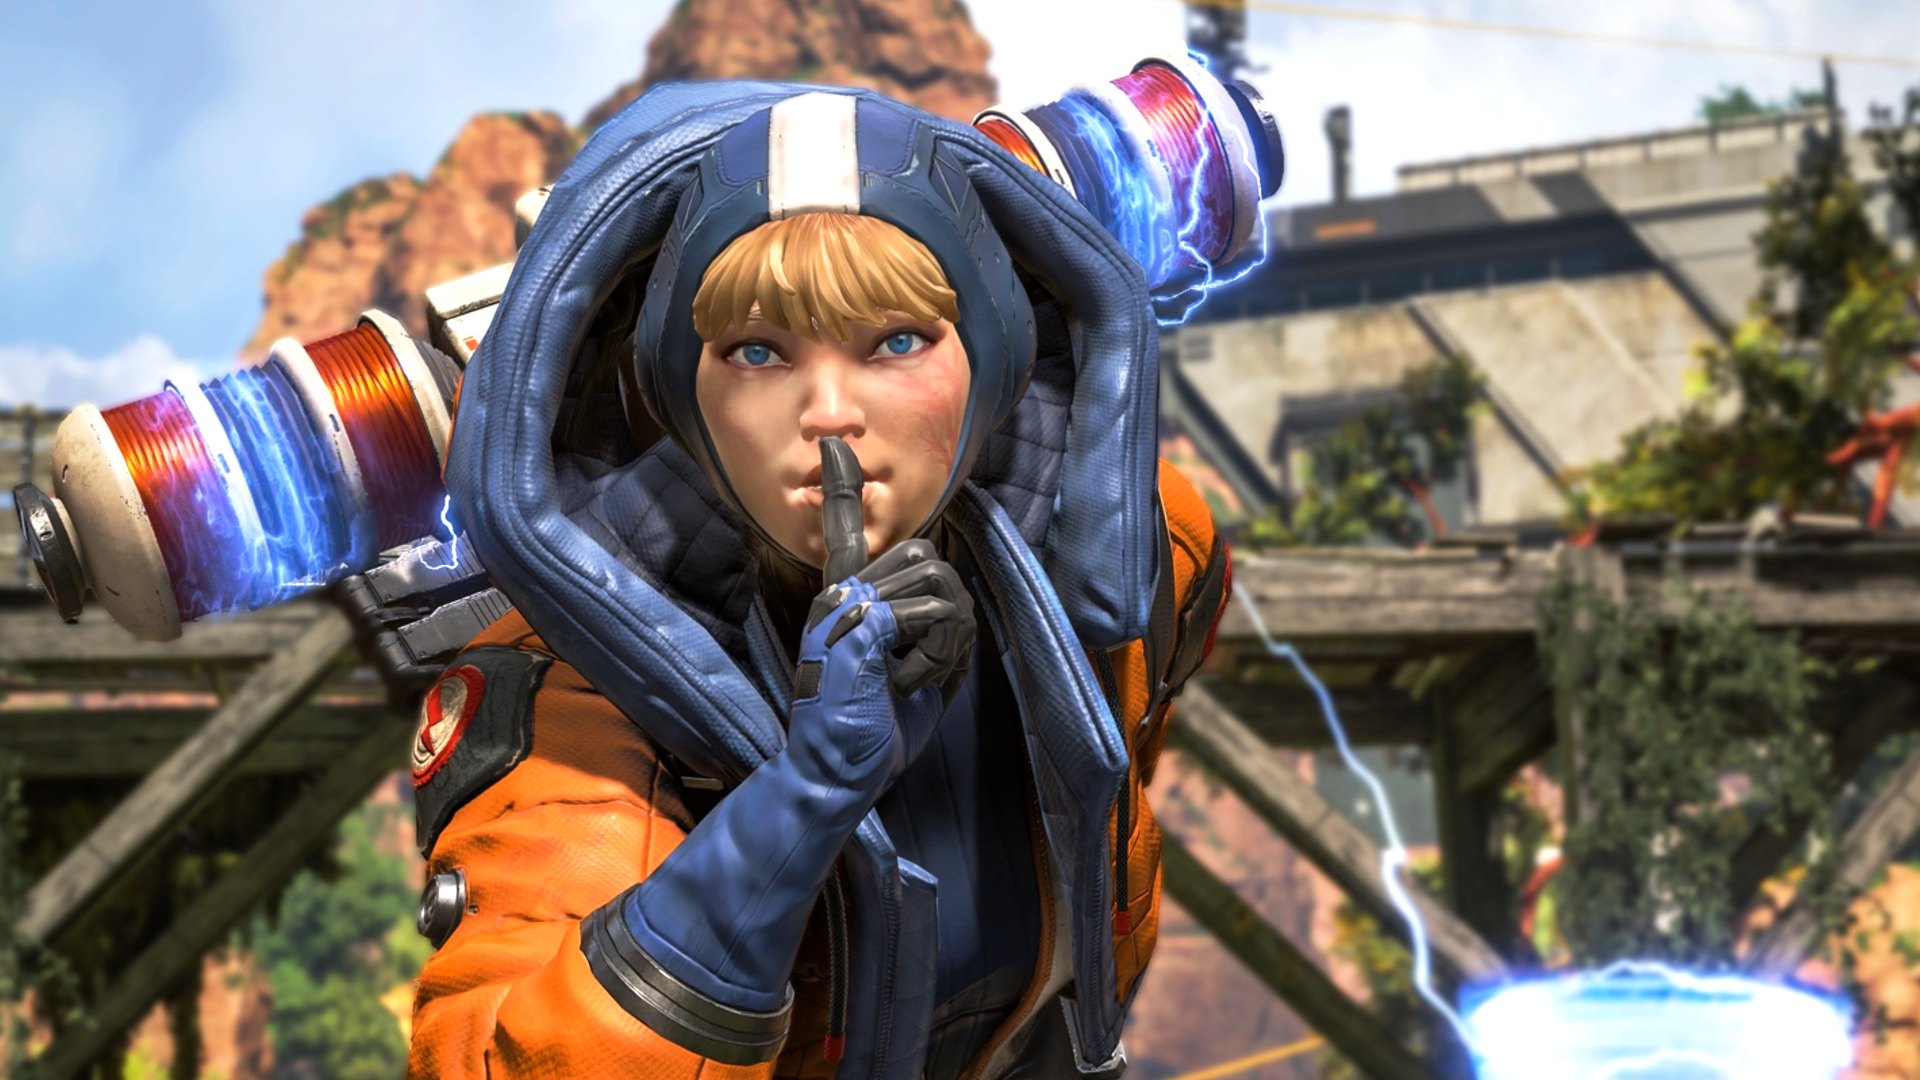 Apex Legends patch gives Wattson a “major buff” (it’s entirely cosmetic)